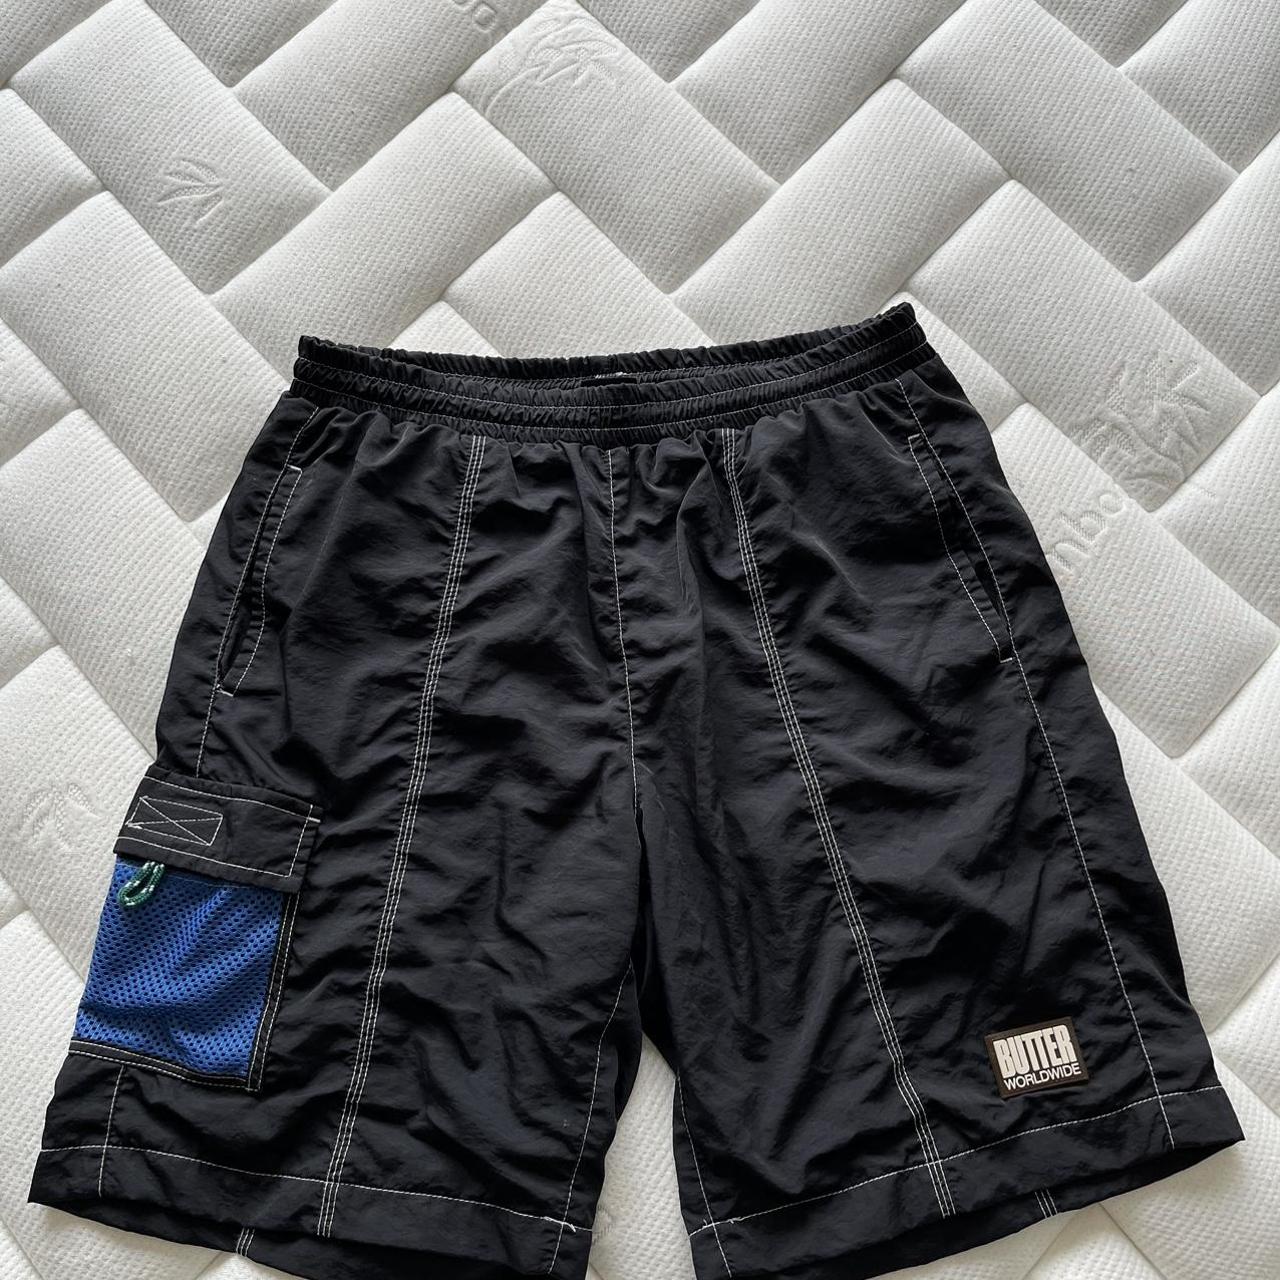 Butter goods athletic short Perfect condition no... - Depop